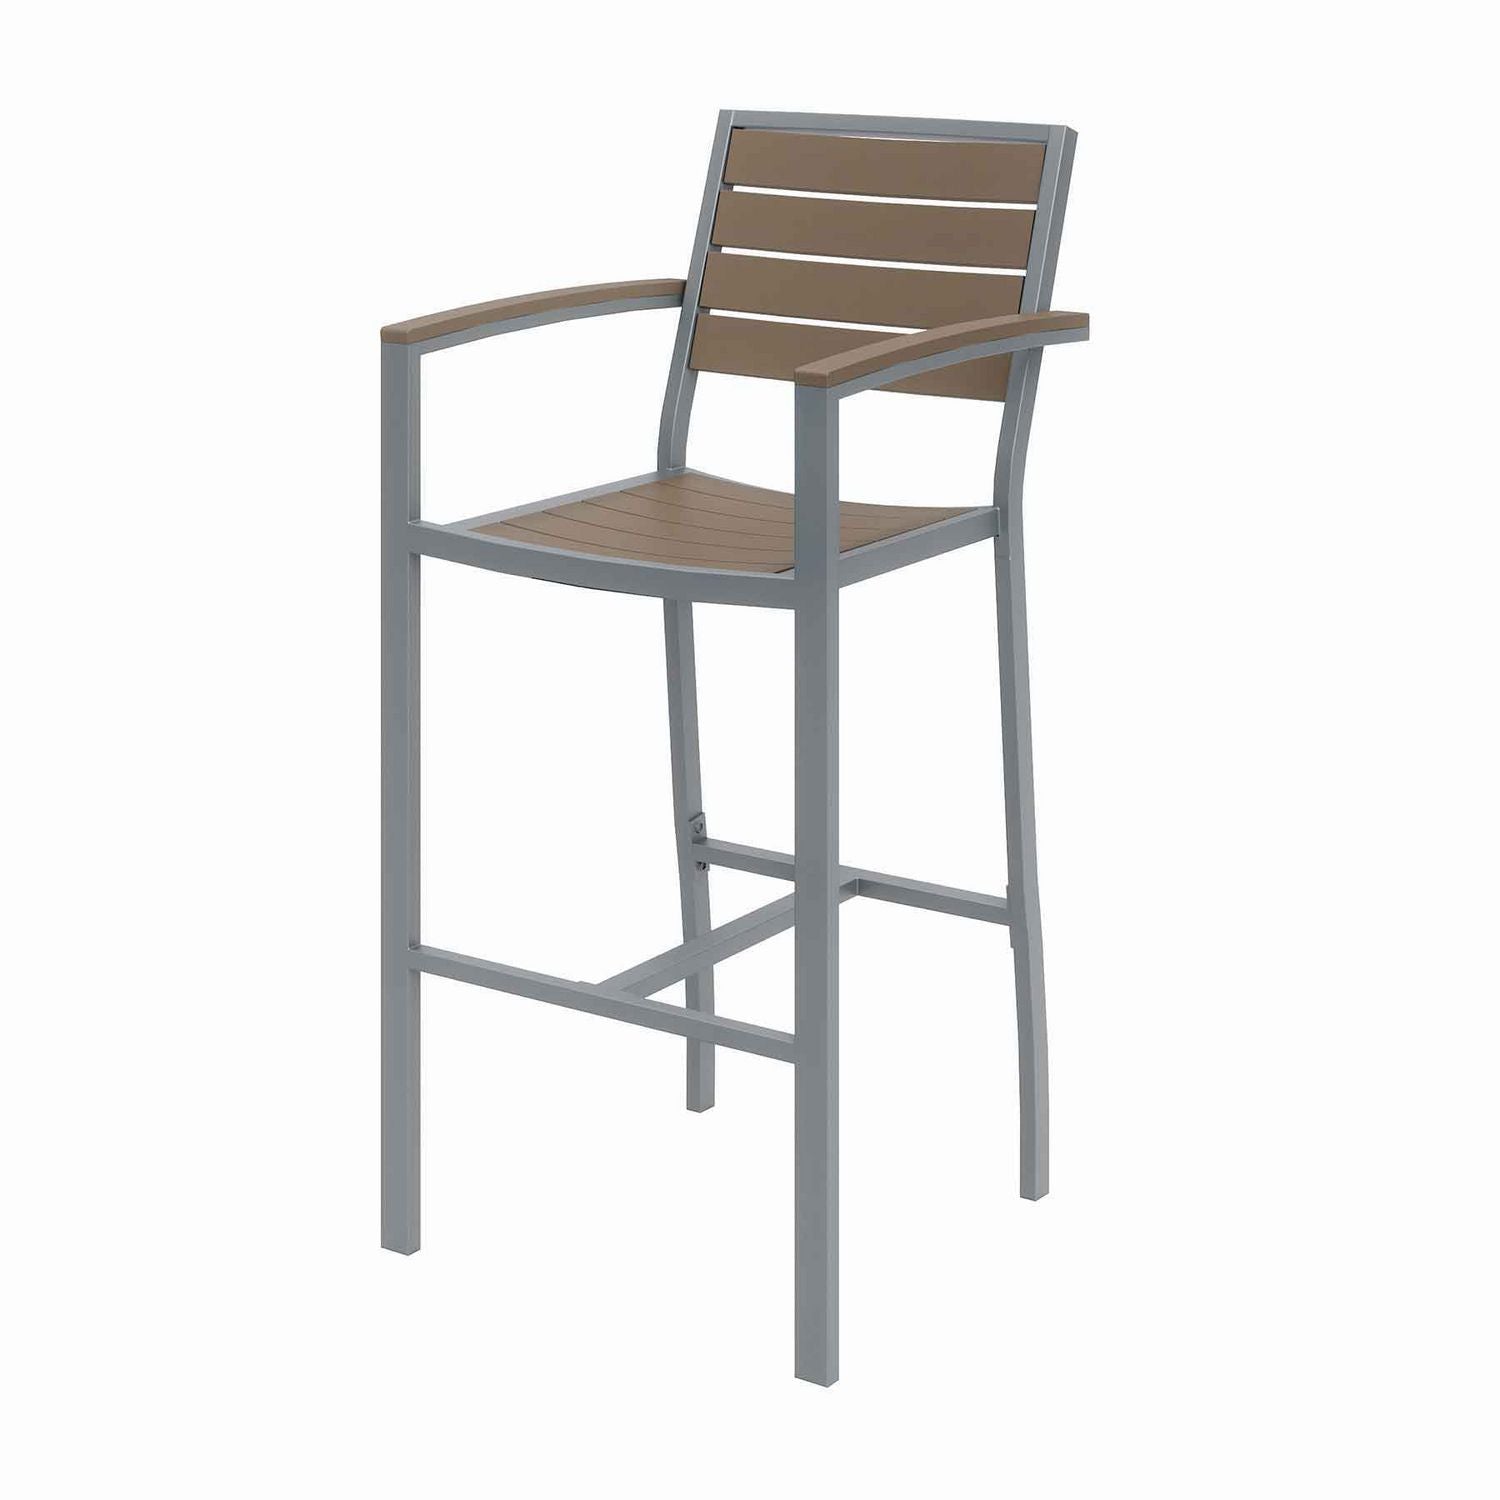 eveleen-outdoor-bistro-patio-table-with-four-mocha-powder-coated-polymer-barstools-32-x-55-mocha-ships-in-4-6-bus-days_kfi840031925190 - 3